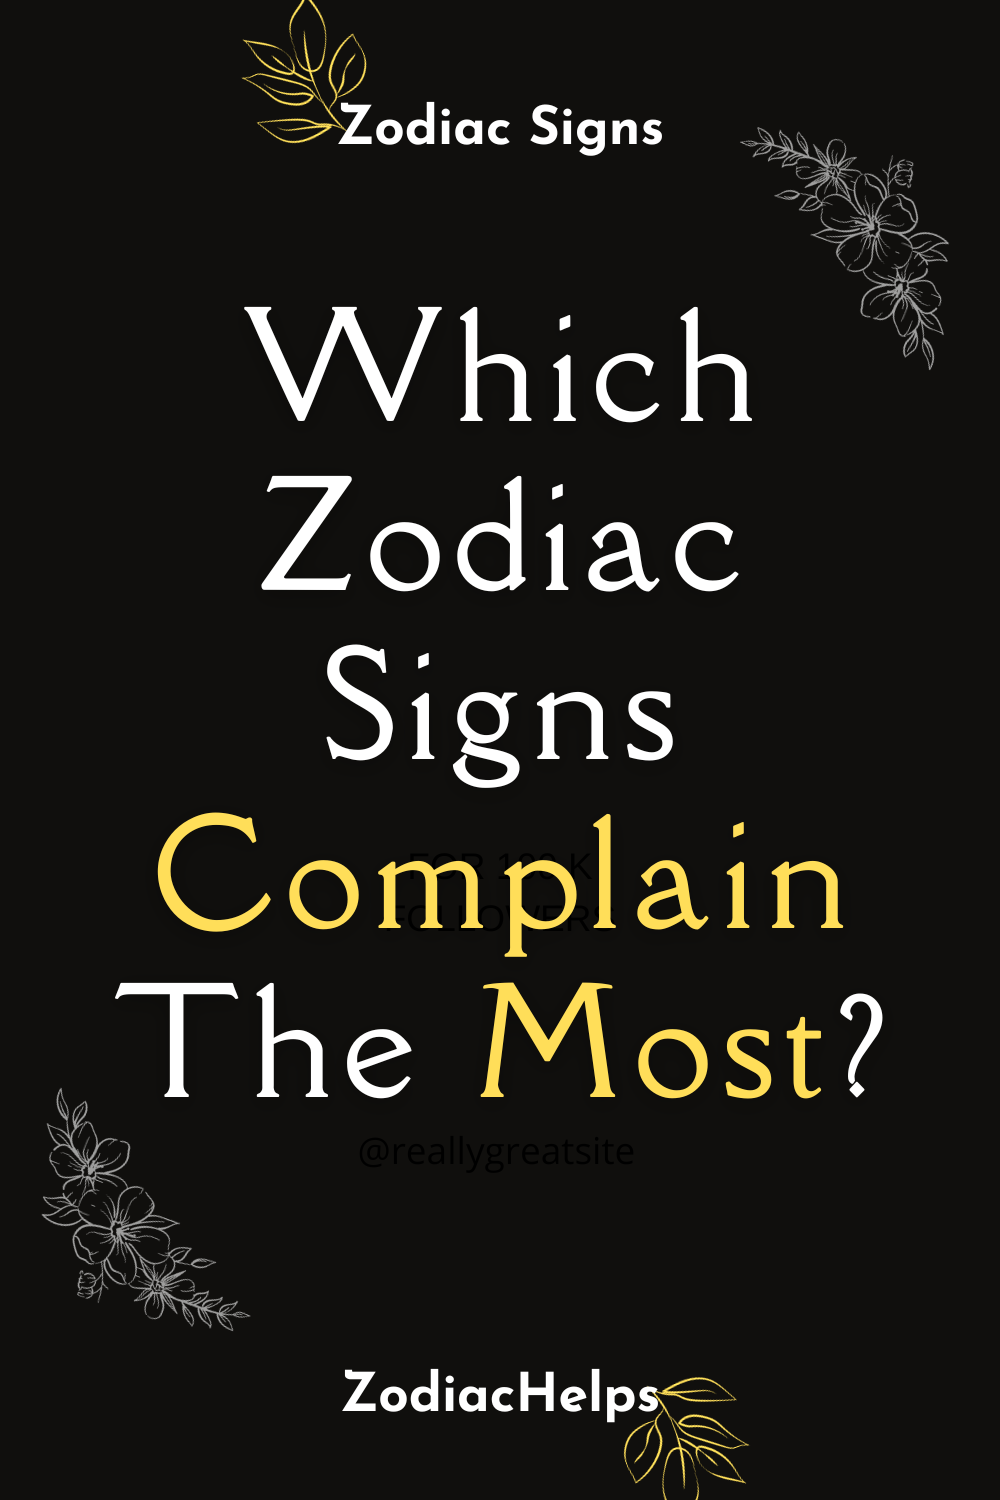 Which Zodiac Signs Complain The Most?